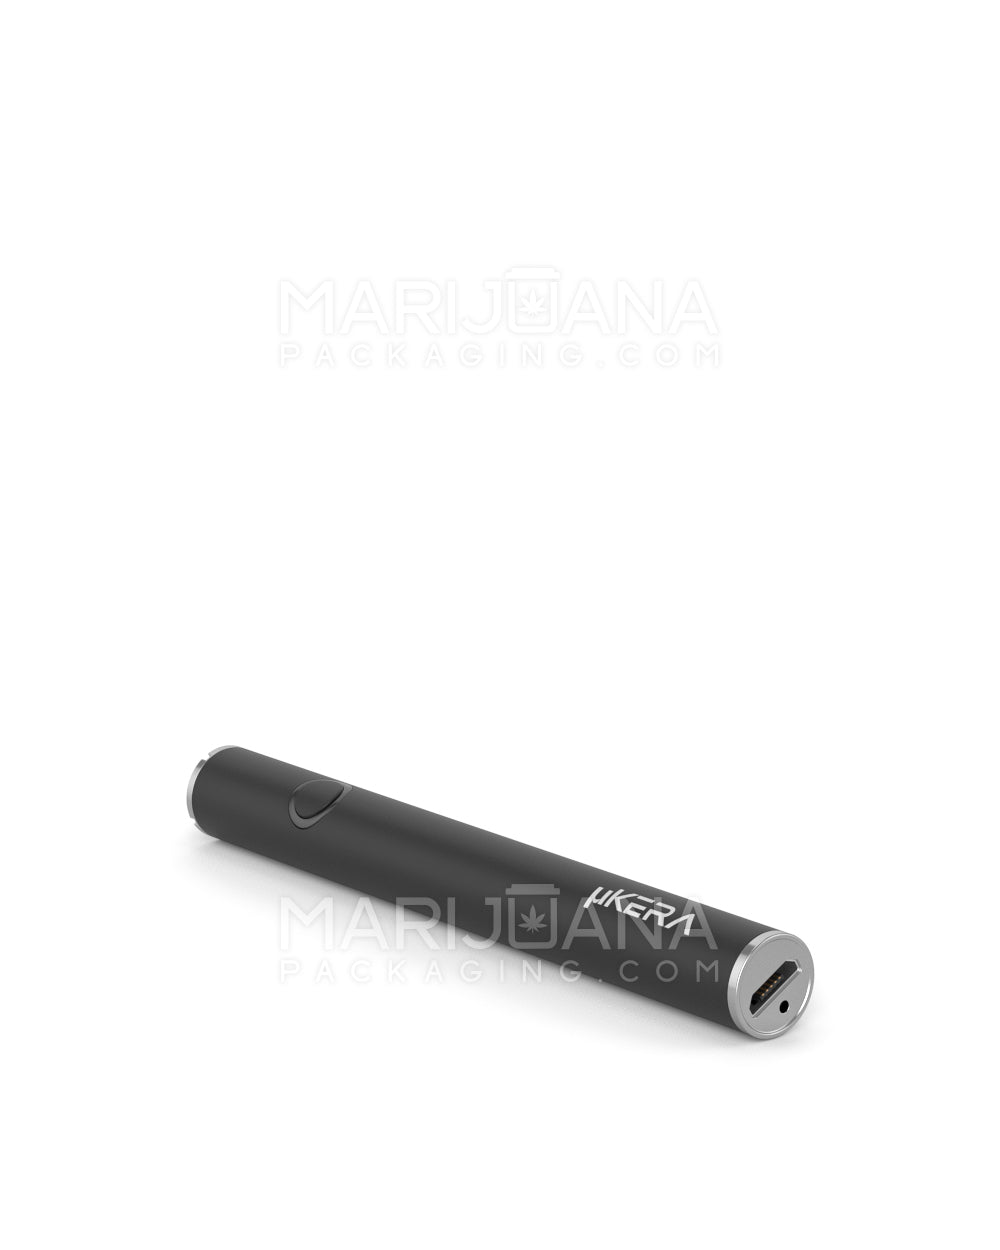 RAE | Variable Voltage Soft Touch Vape Battery | 320mAh - Black - 640 Count - 6